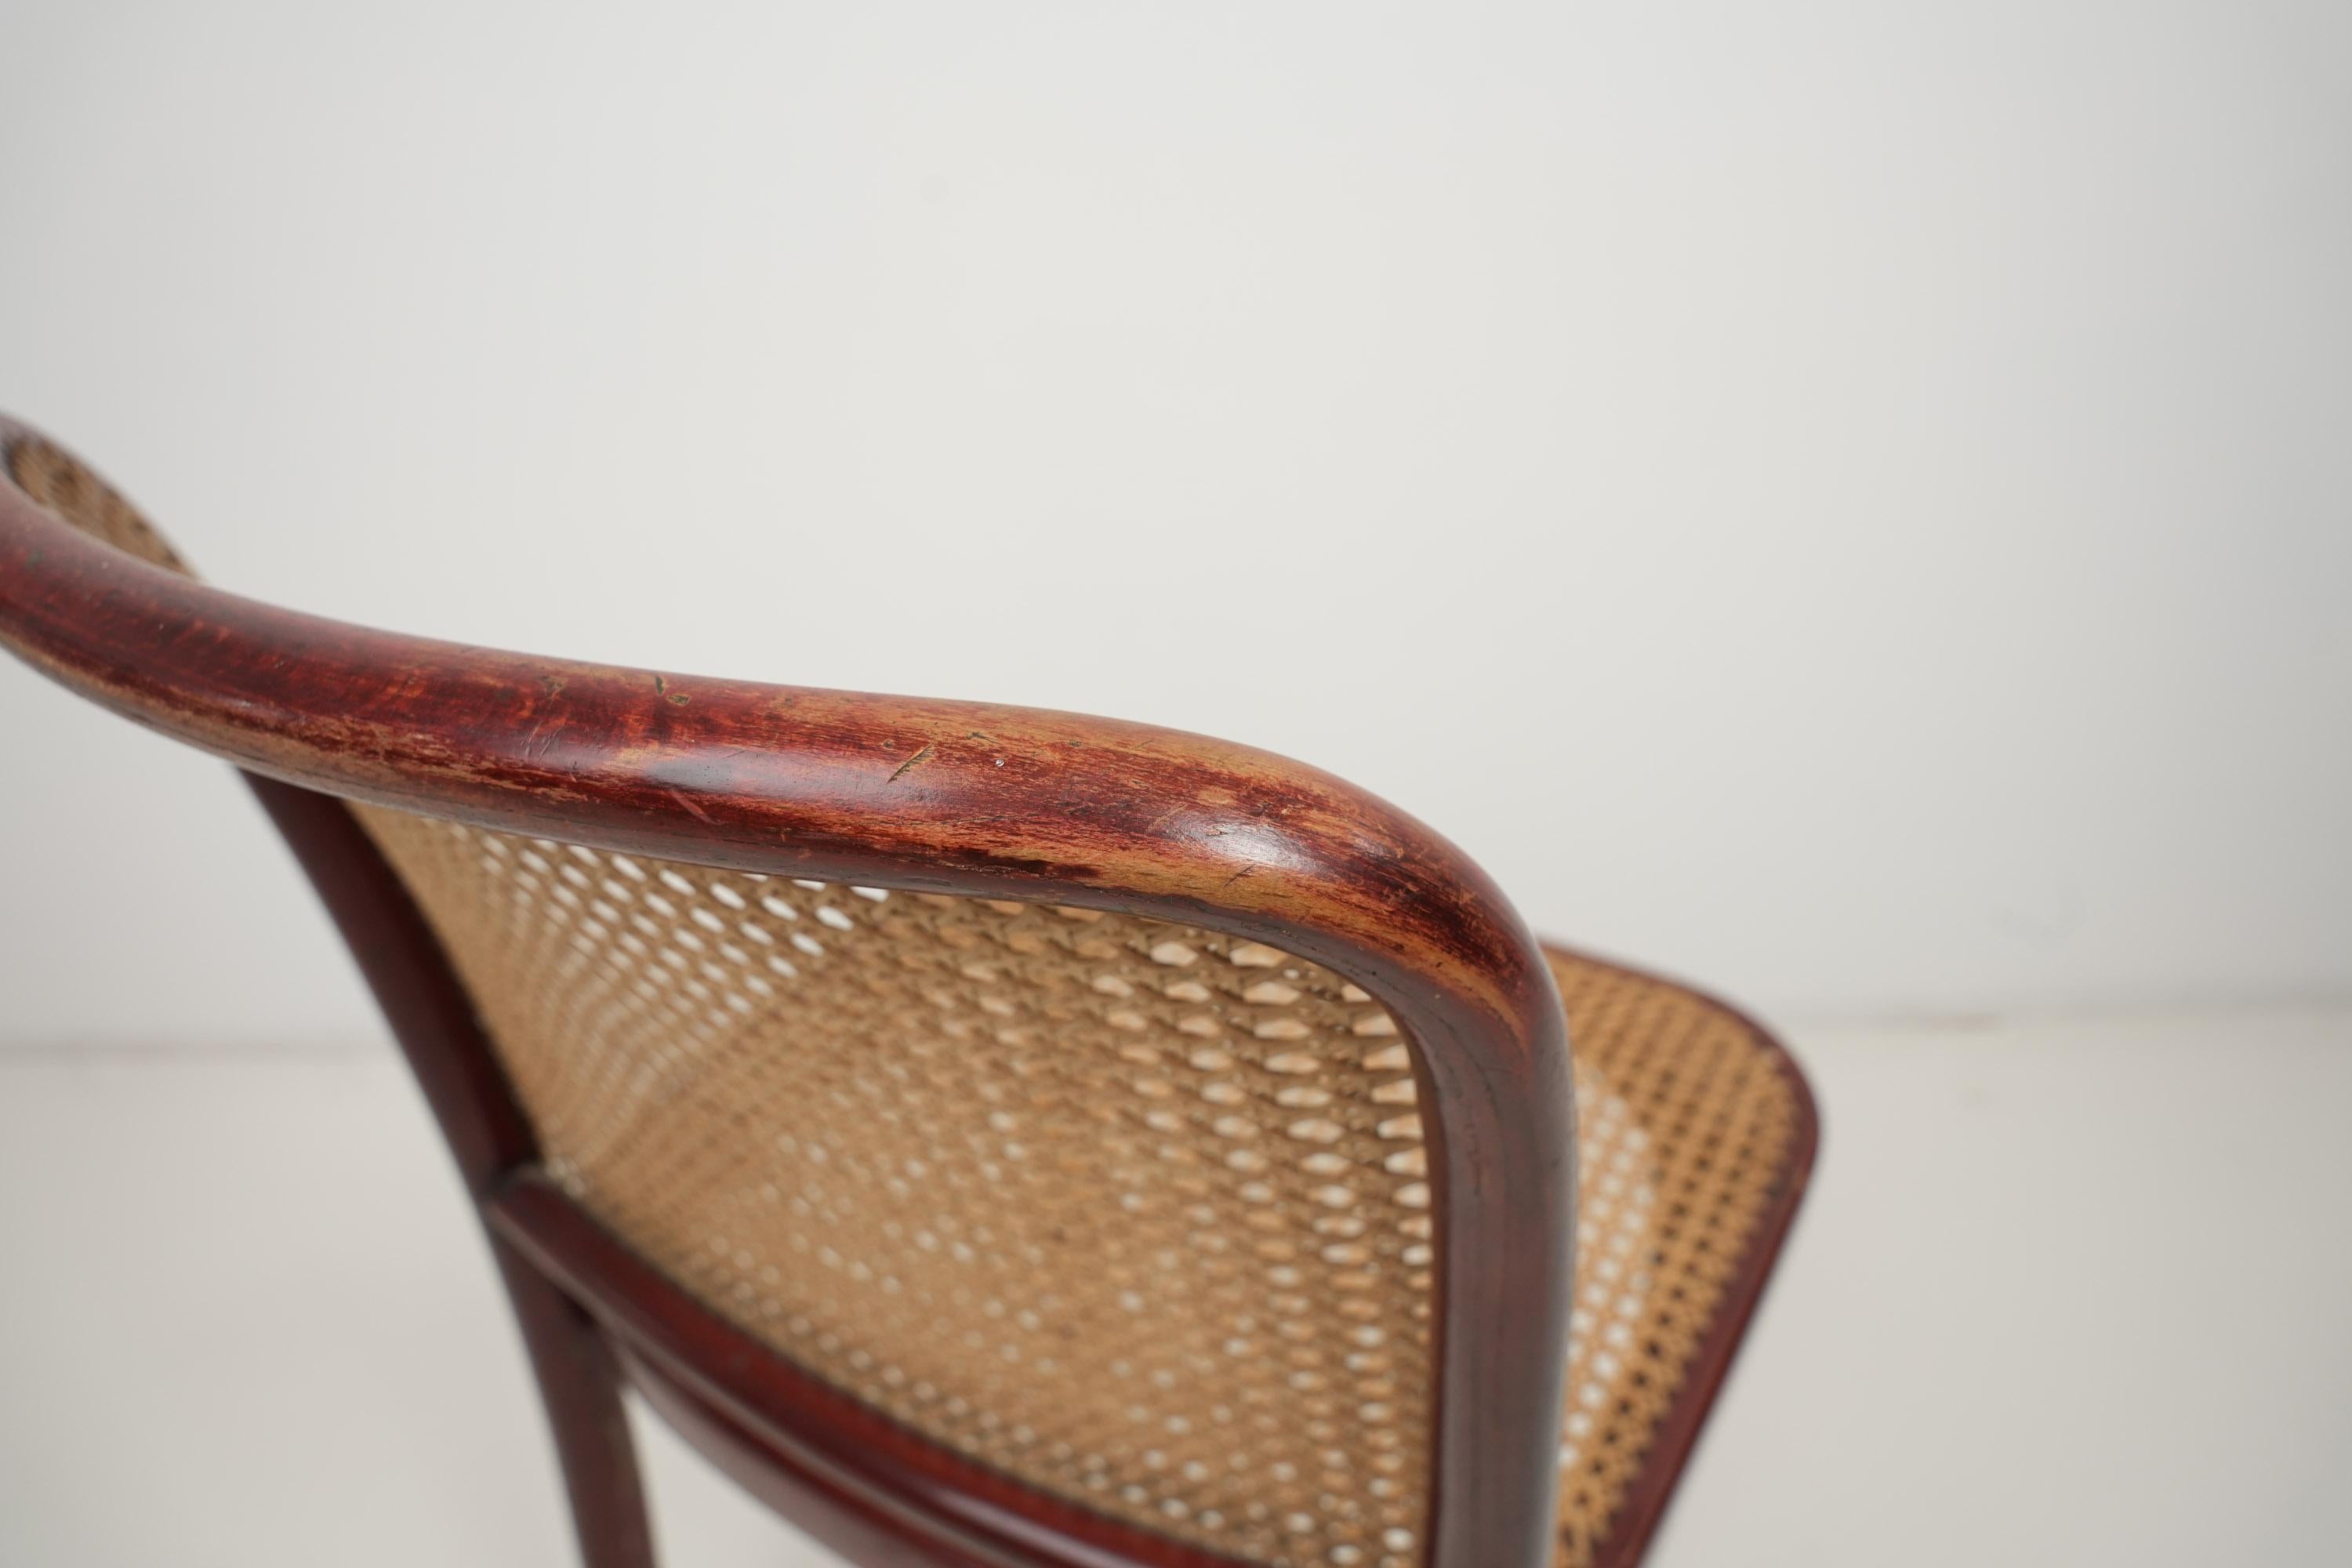 A 811 Chair By Josef Hoffmann or Josef Frank for Thonet 1920s For Sale 2